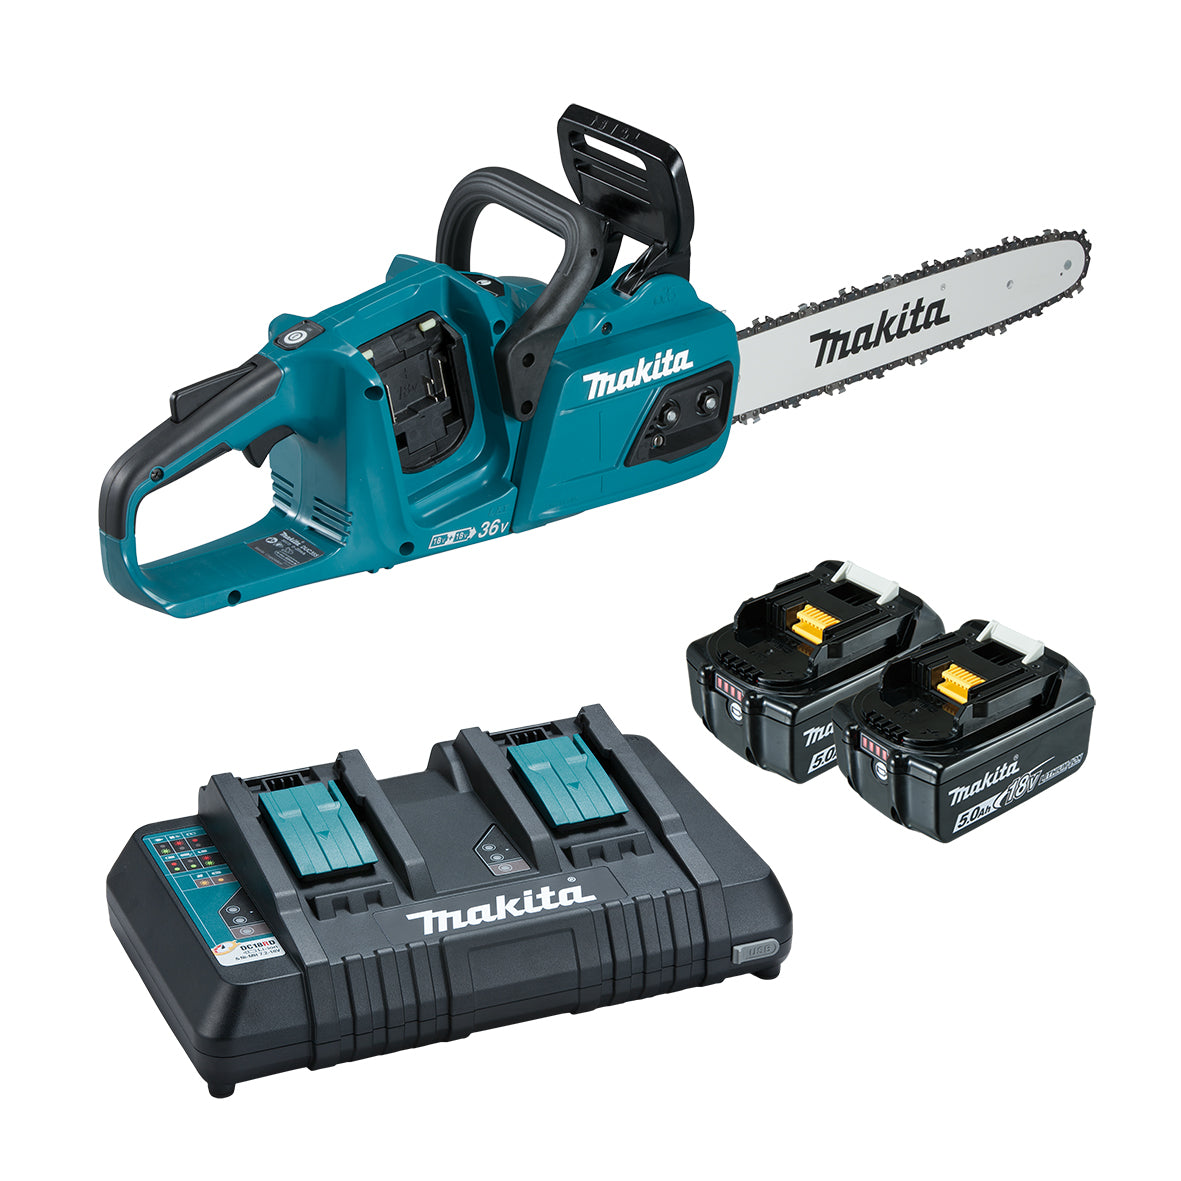 18Vx2 5.0Ah 350mm 14" Brushless Chainsaw Kit DUC355PT2 by Makita